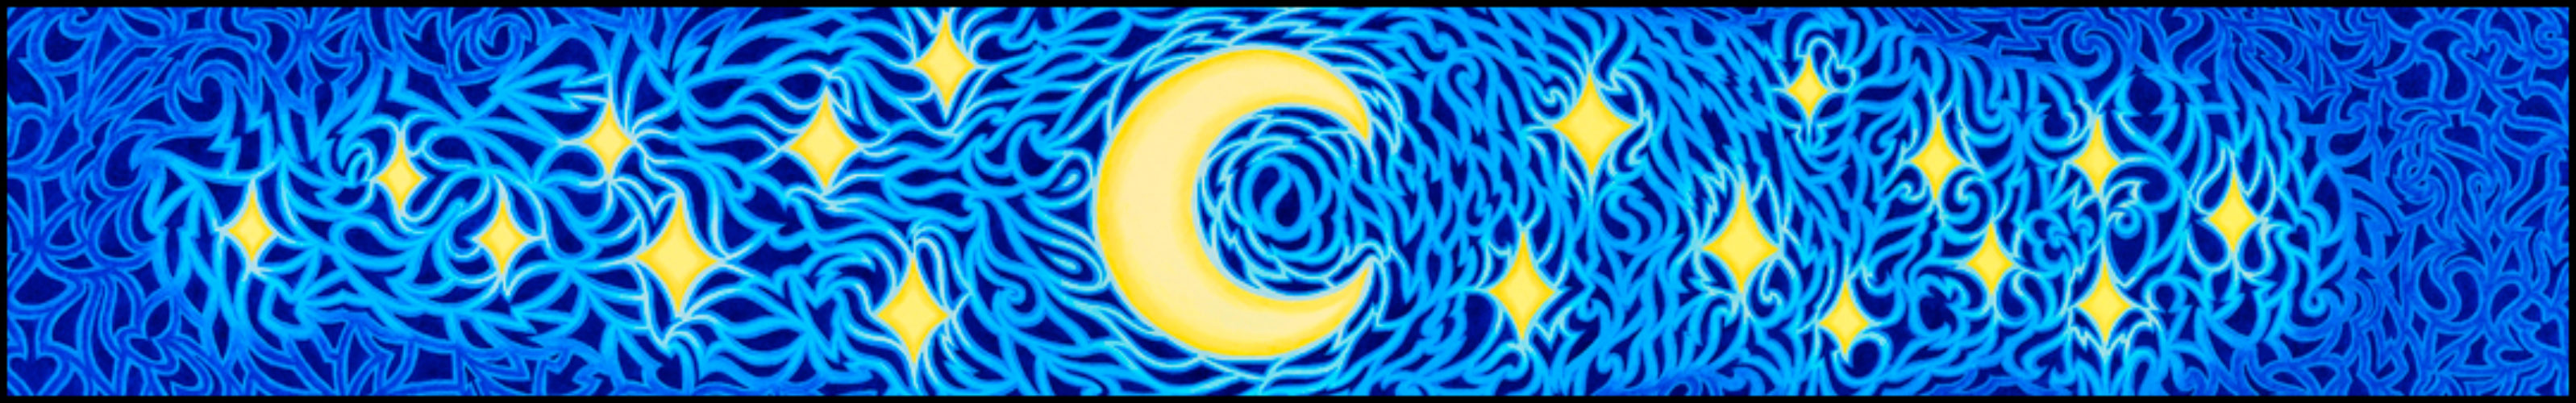 Energy of The Night - Oil on canvas, 8" x 48", 2006-2007